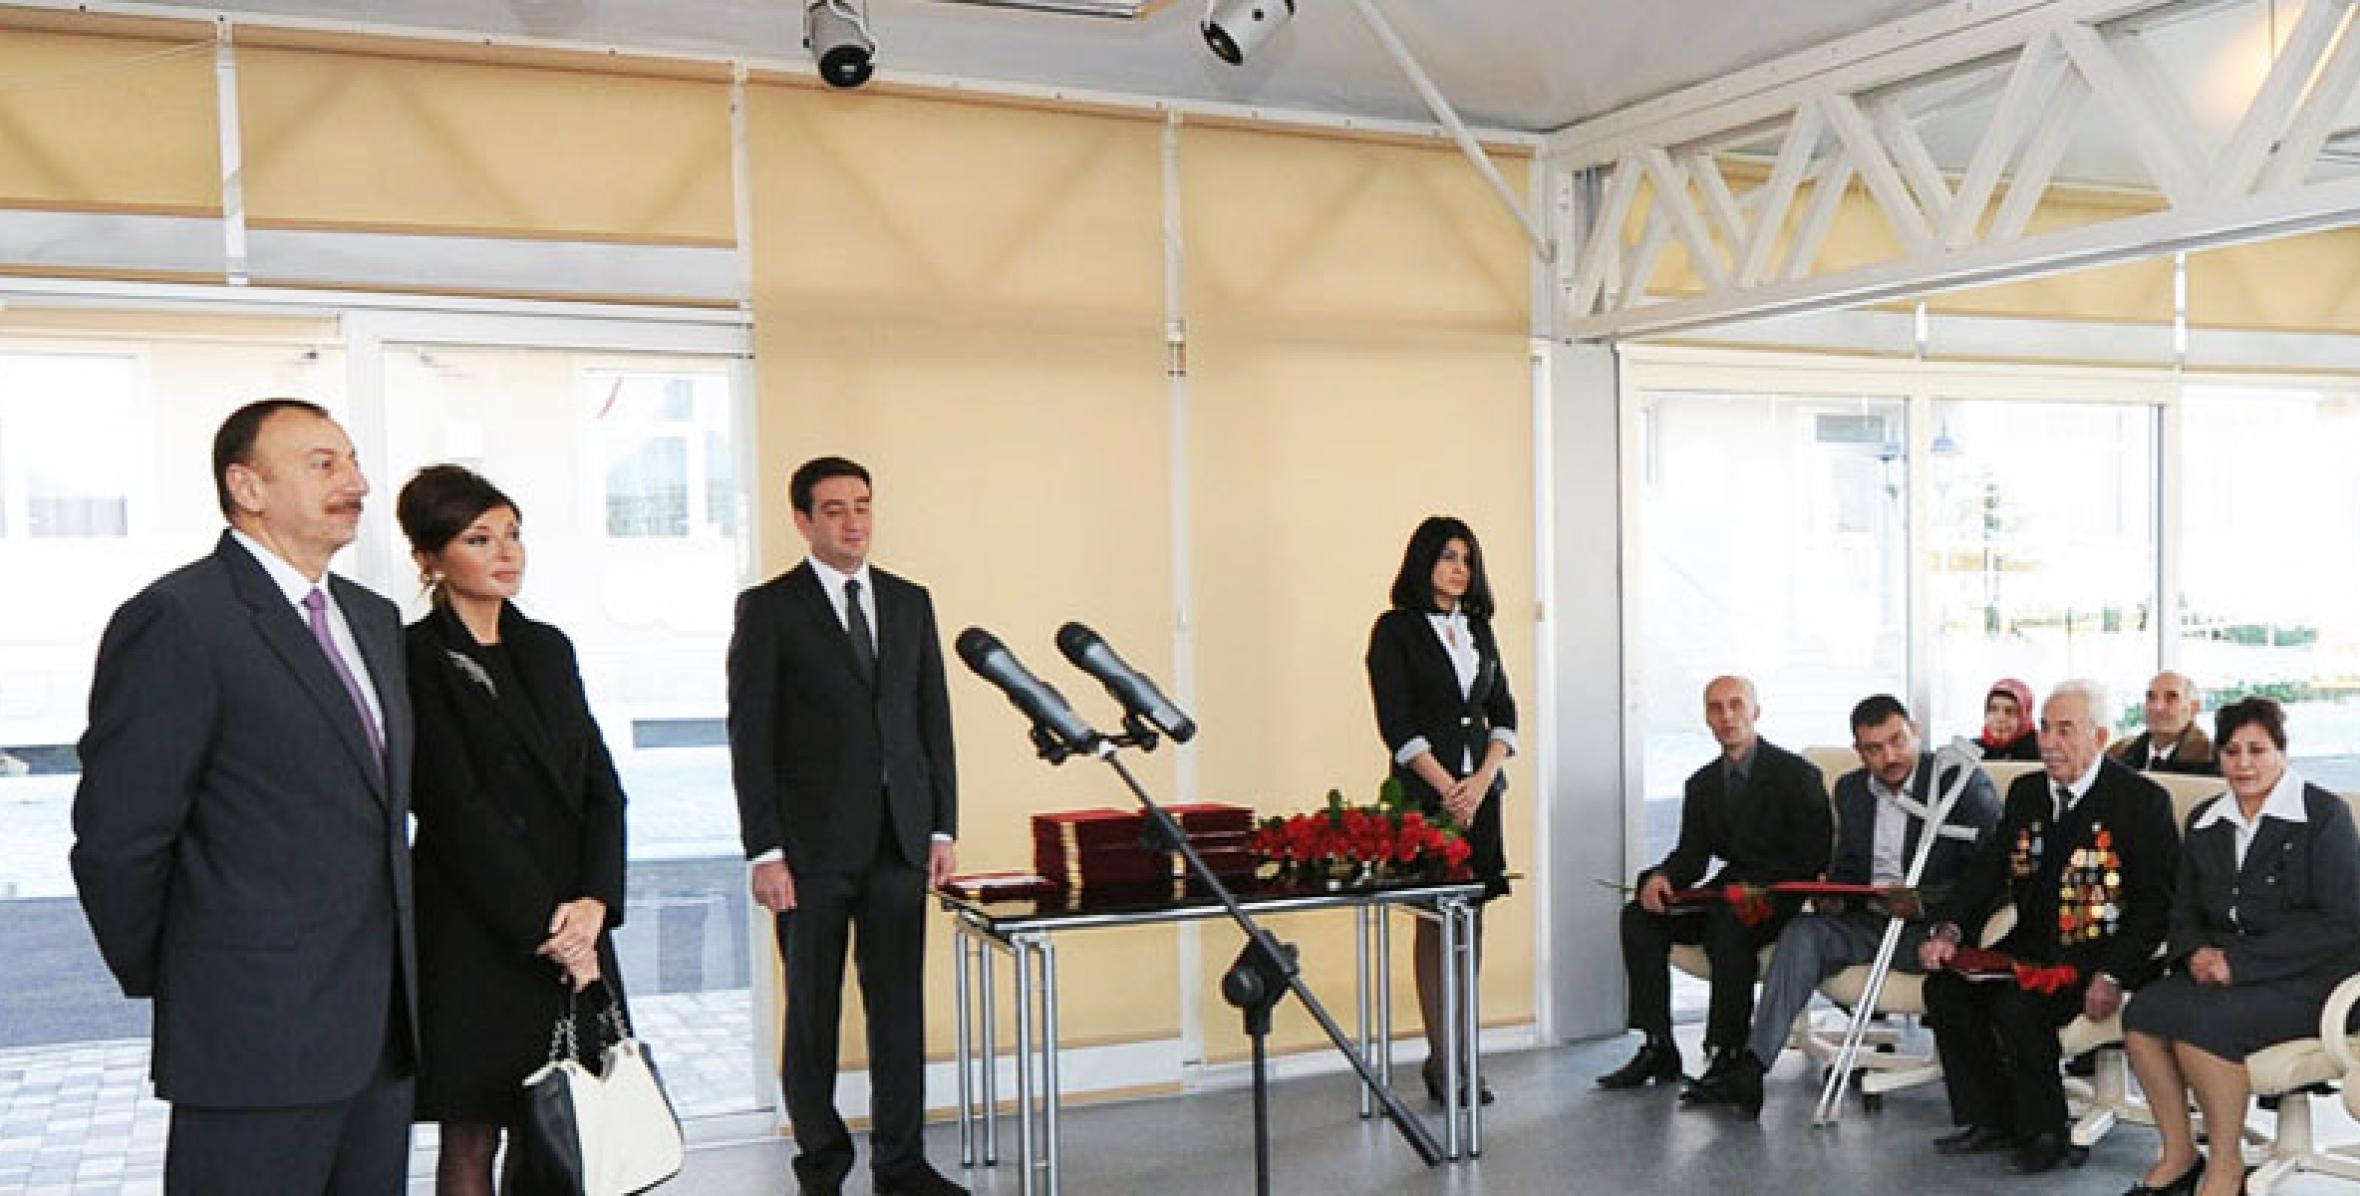 Speech by Ilham Aliyev at the commissioning of a residential building for Karabakh war veterans and martyrs’ families